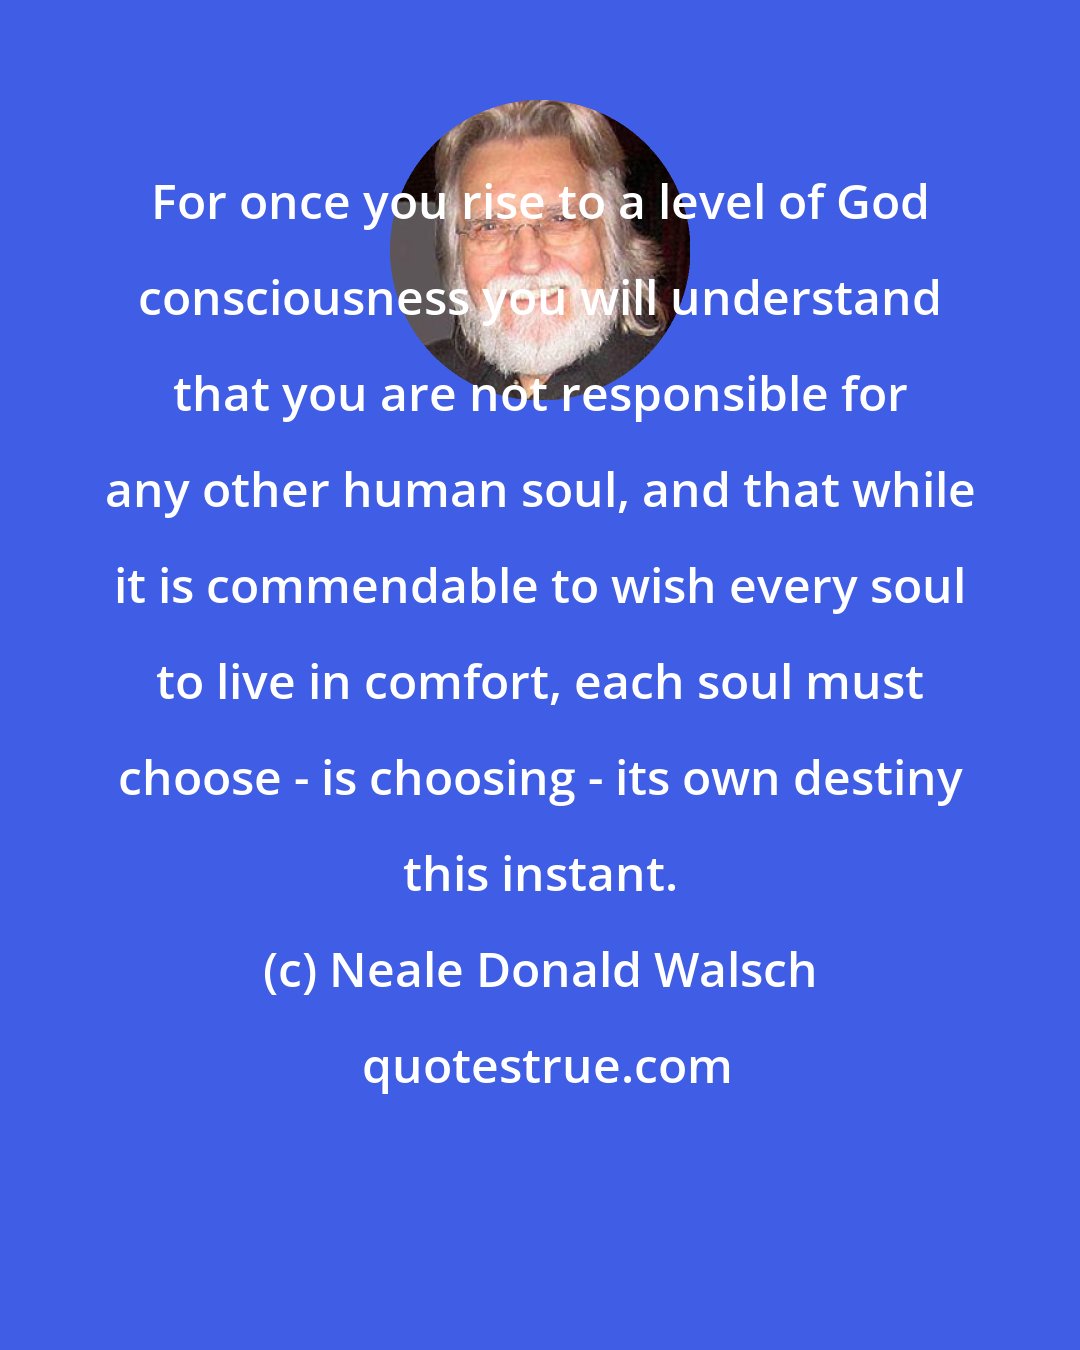 Neale Donald Walsch: For once you rise to a level of God consciousness you will understand that you are not responsible for any other human soul, and that while it is commendable to wish every soul to live in comfort, each soul must choose - is choosing - its own destiny this instant.